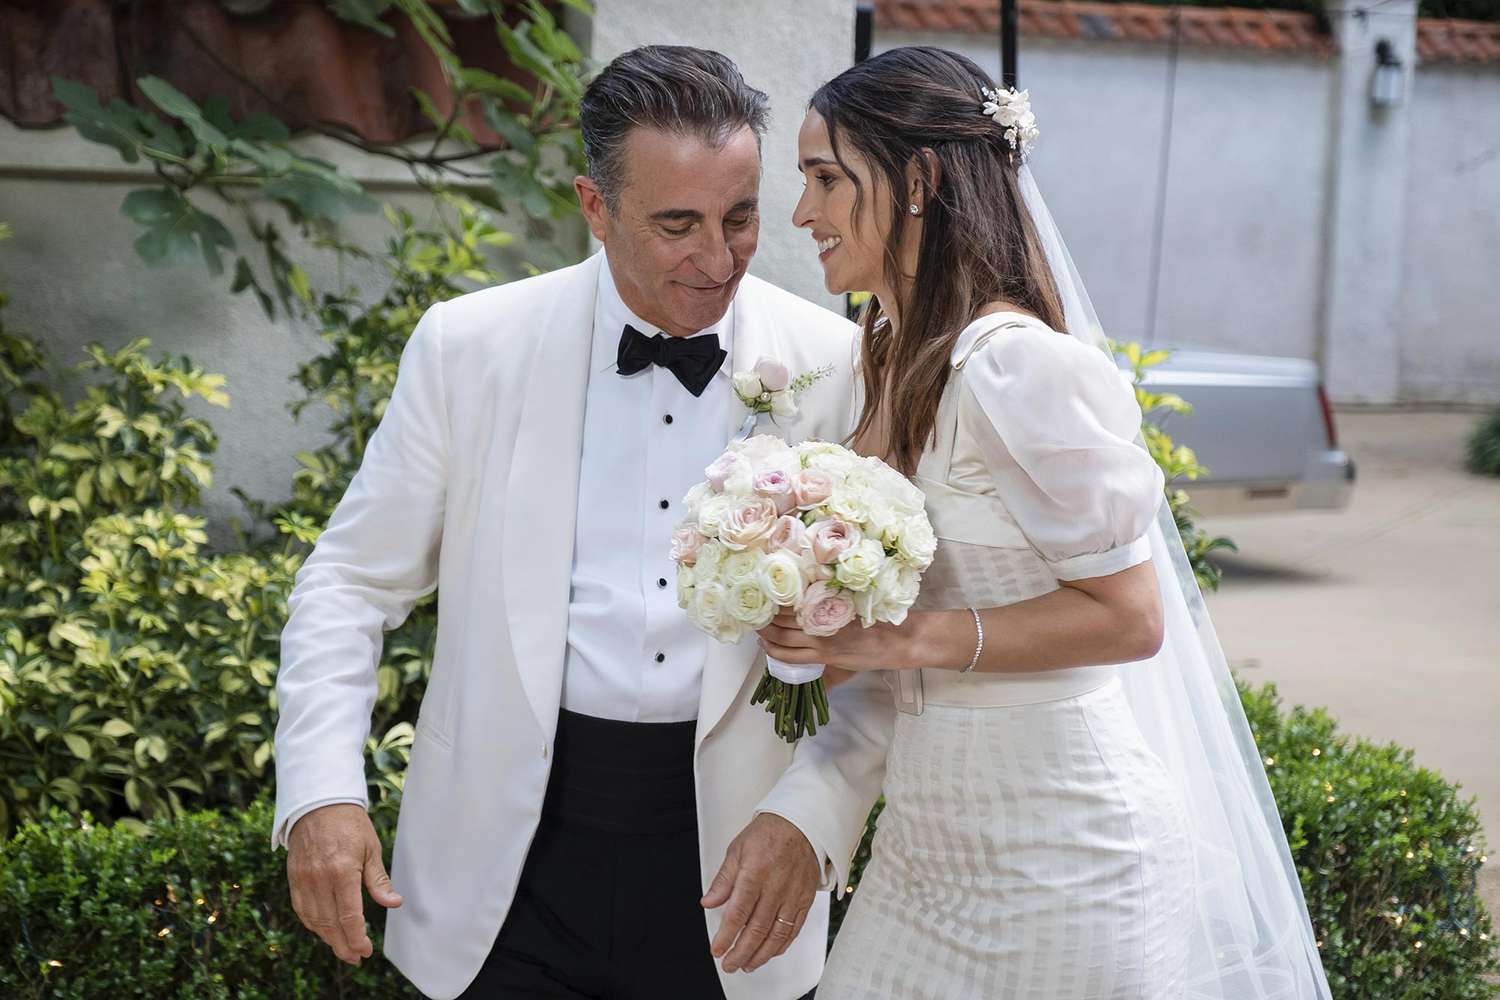 ANDY GARCIA as Billy and ADRIA ARJONA as Sofia in Warner Bros. Pictures' and HBO Max’s "FATHER OF THE BRIDE.”